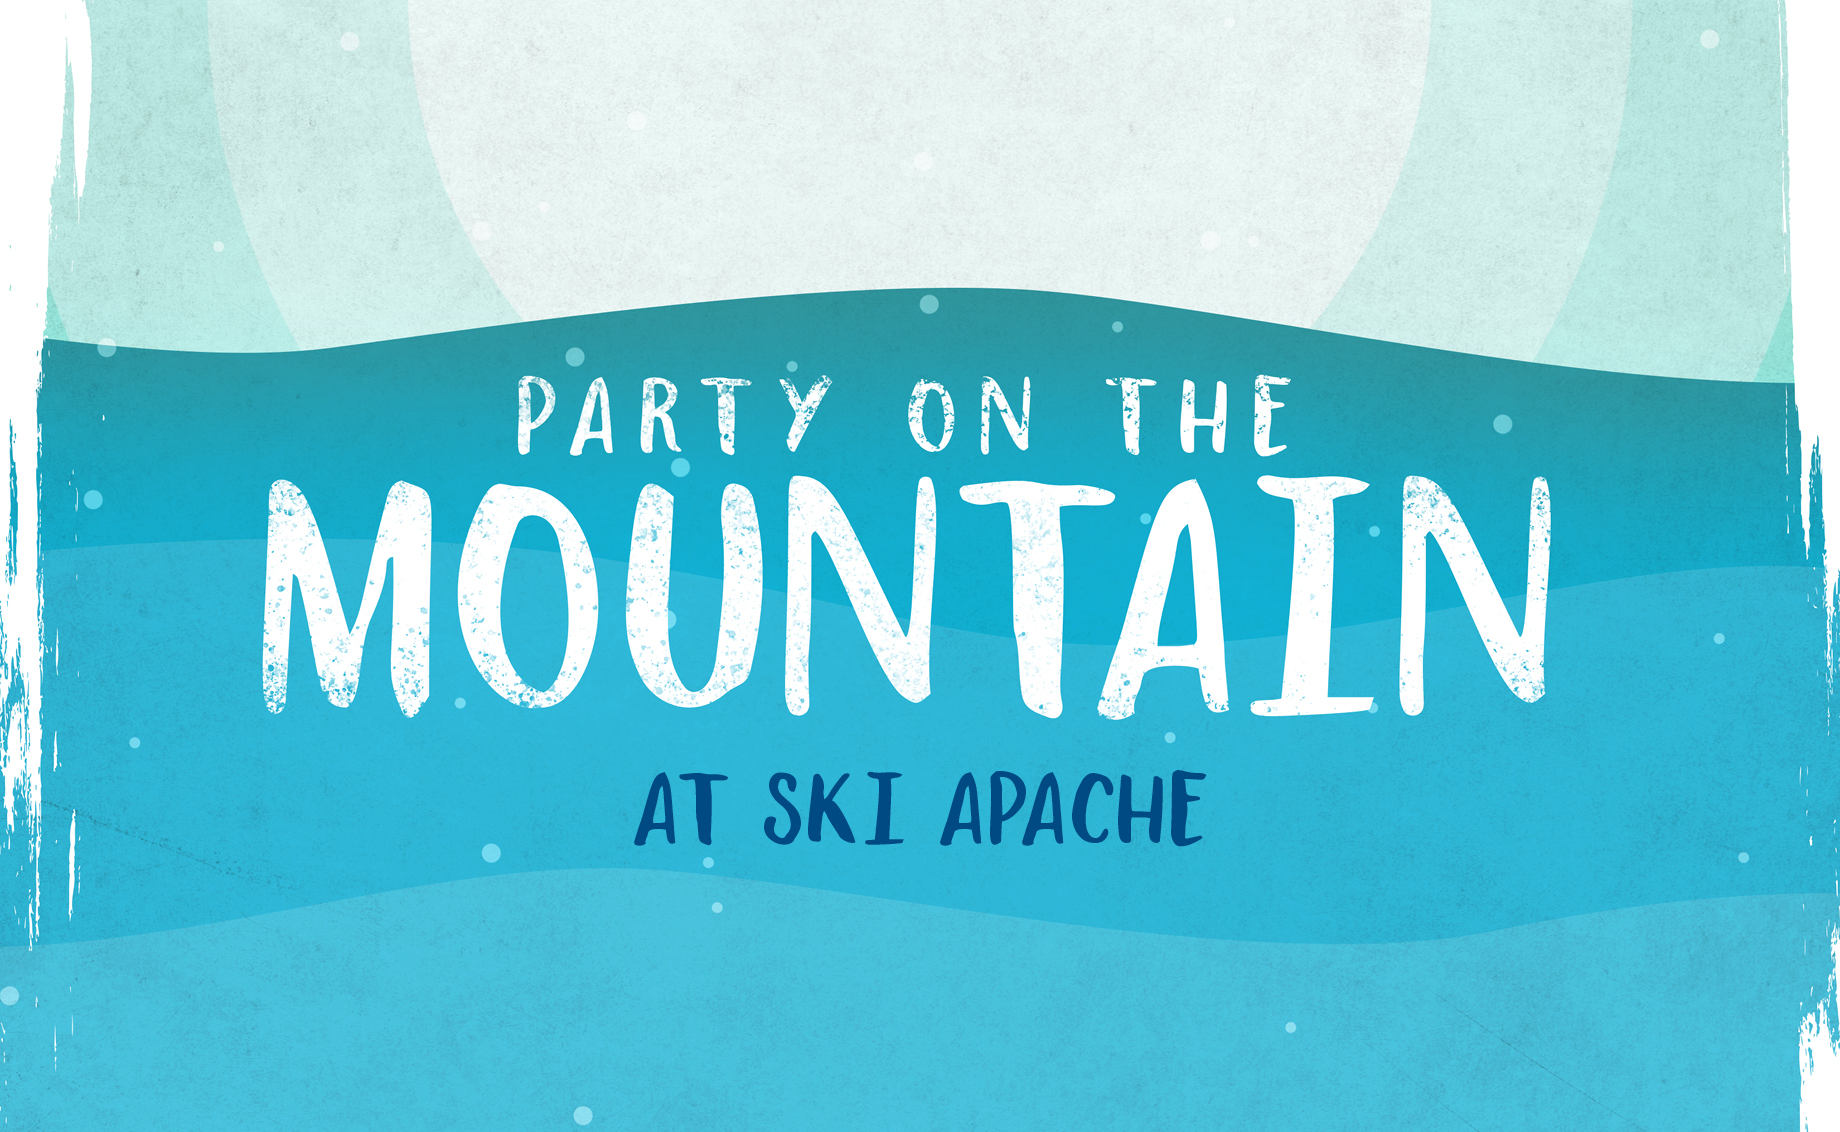 Party on the mountain